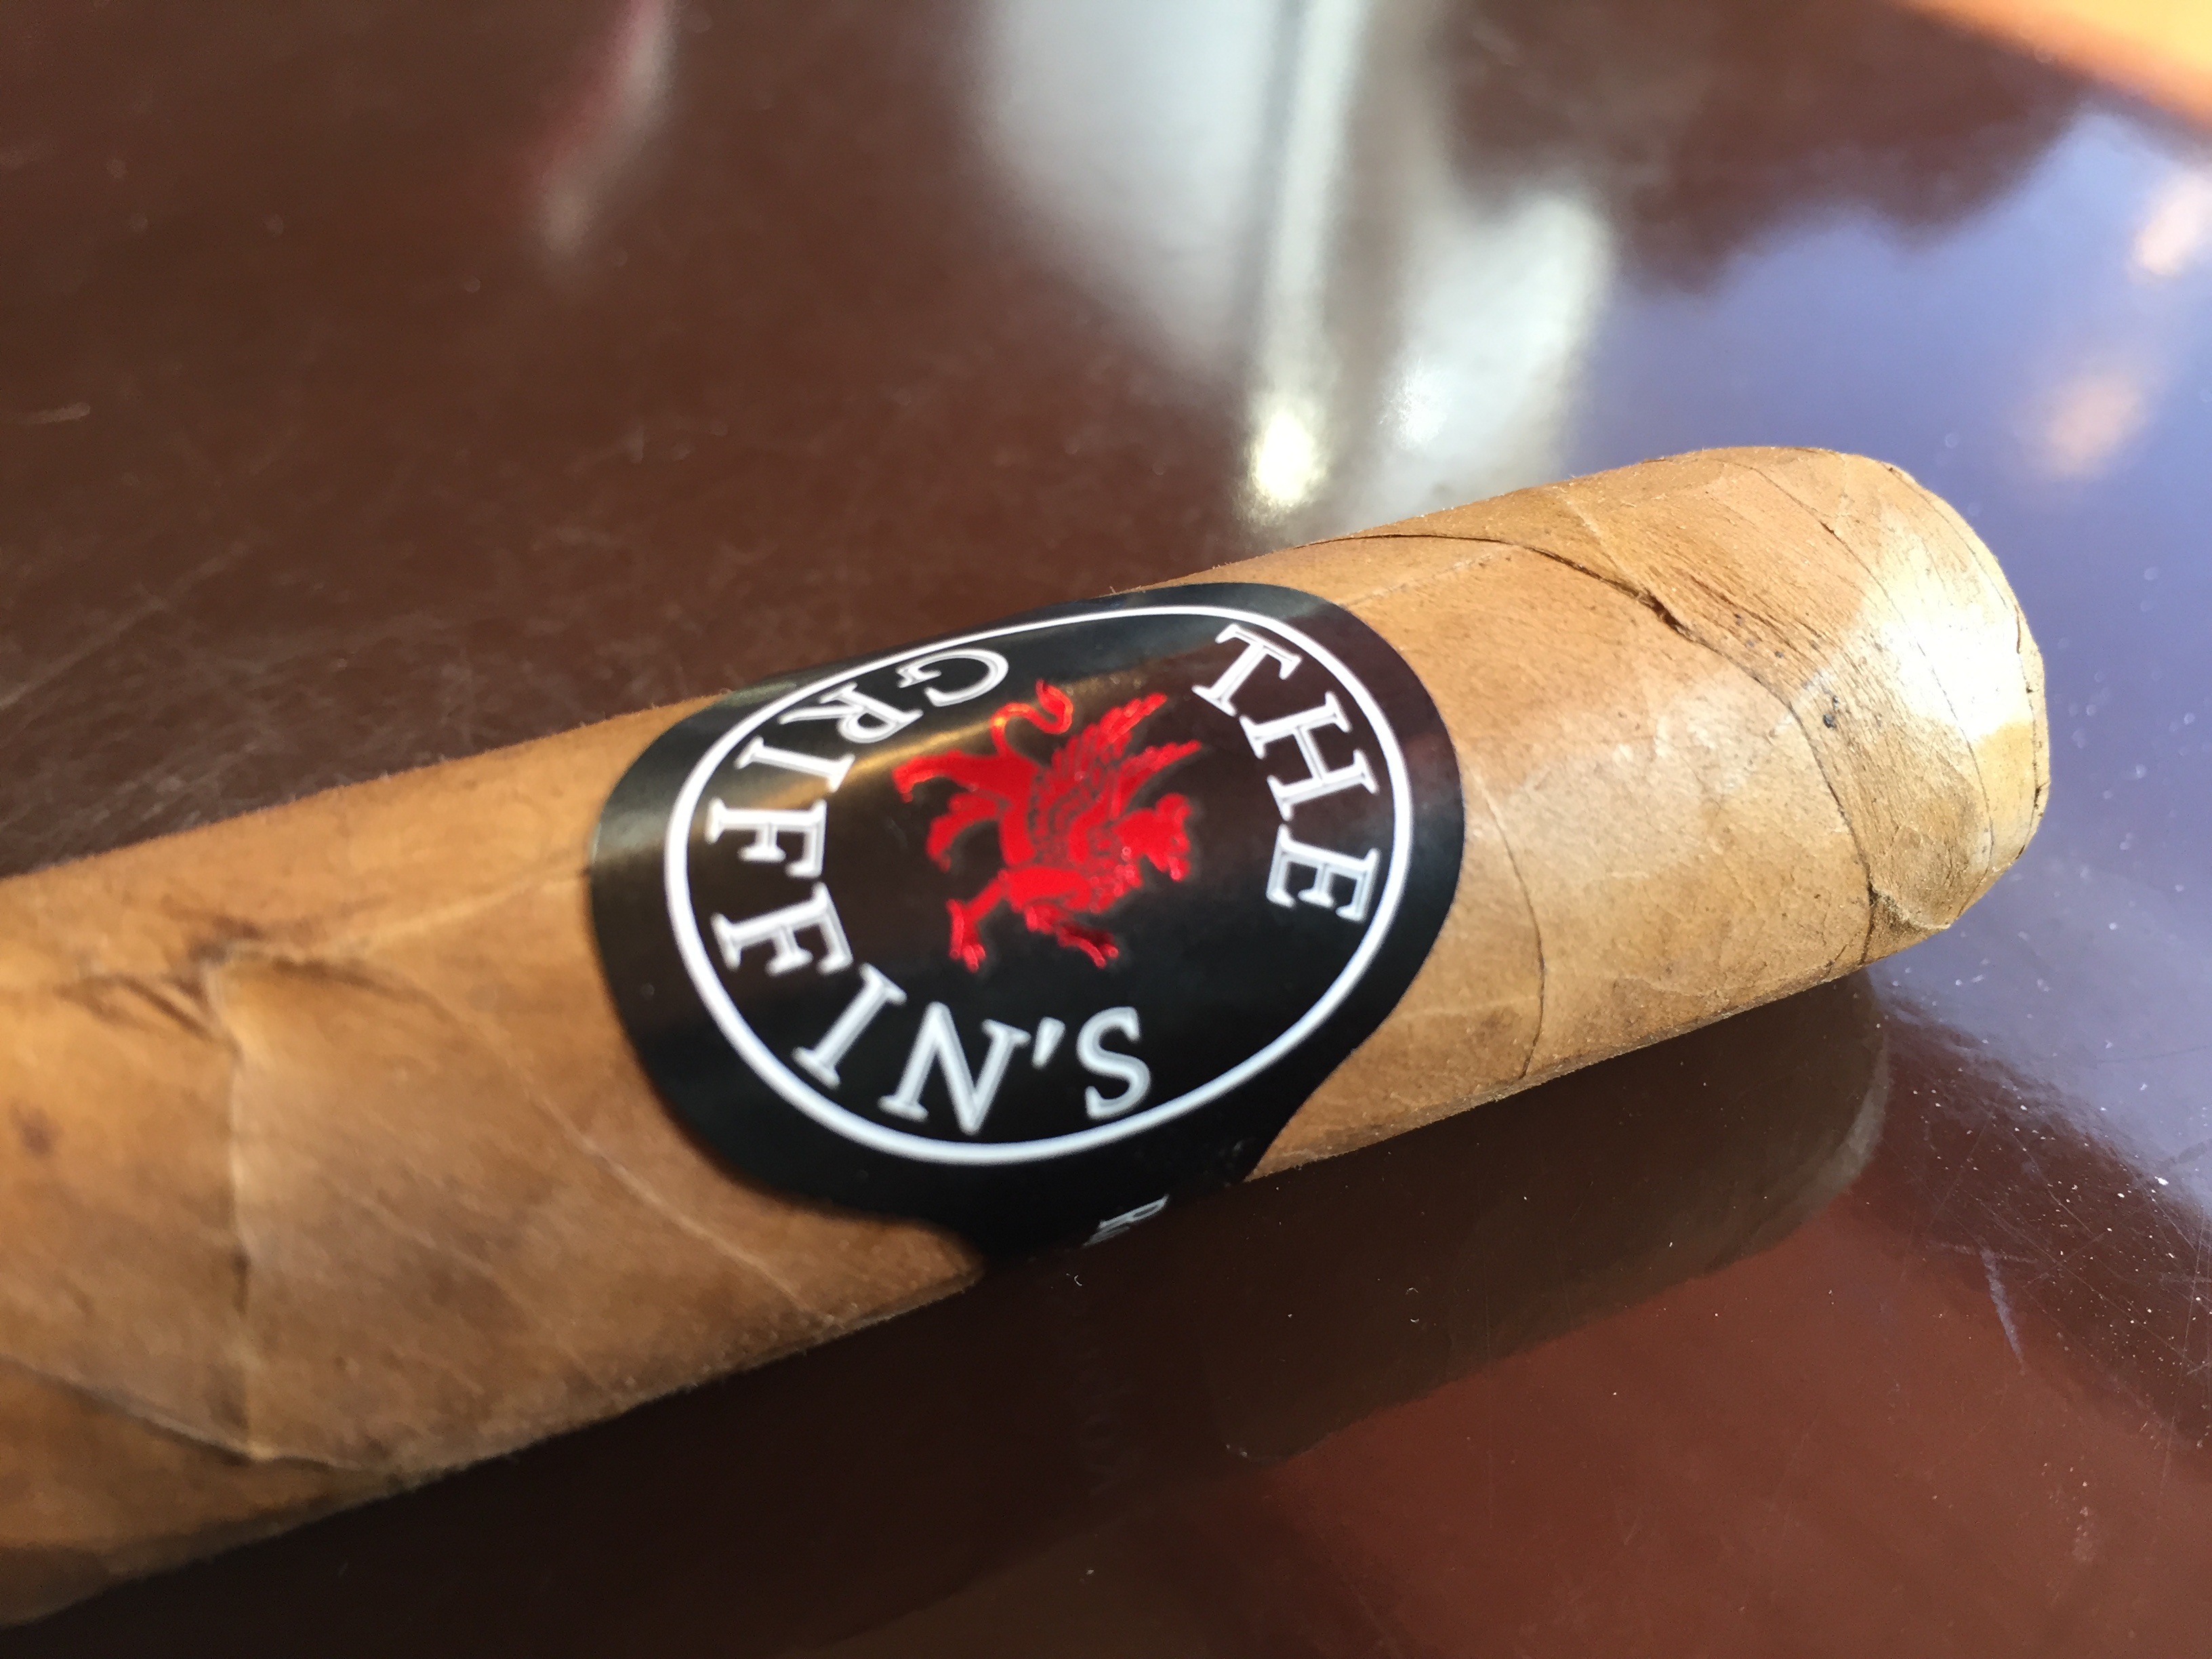 The Griffin’s Nicaragua Robusto